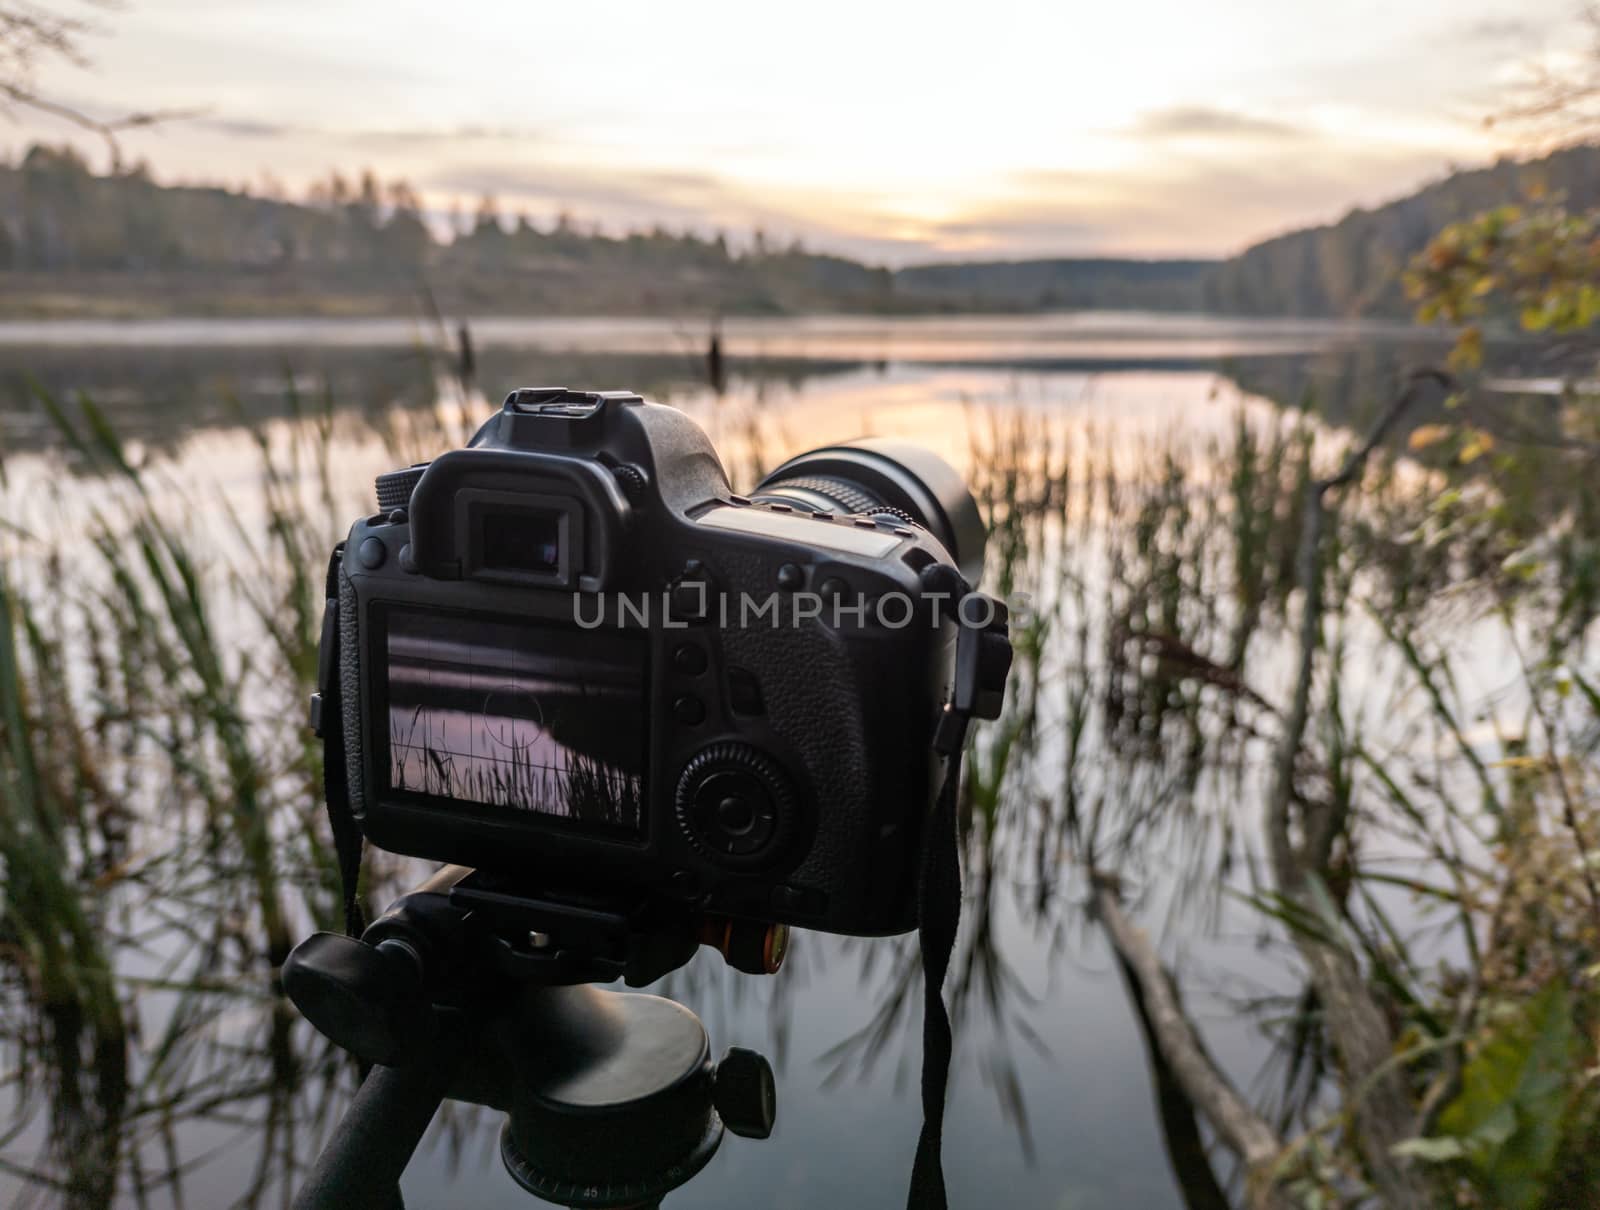 black digital camera on tripod shooting early foggy morning landscape at autumn lake with selective focus by z1b